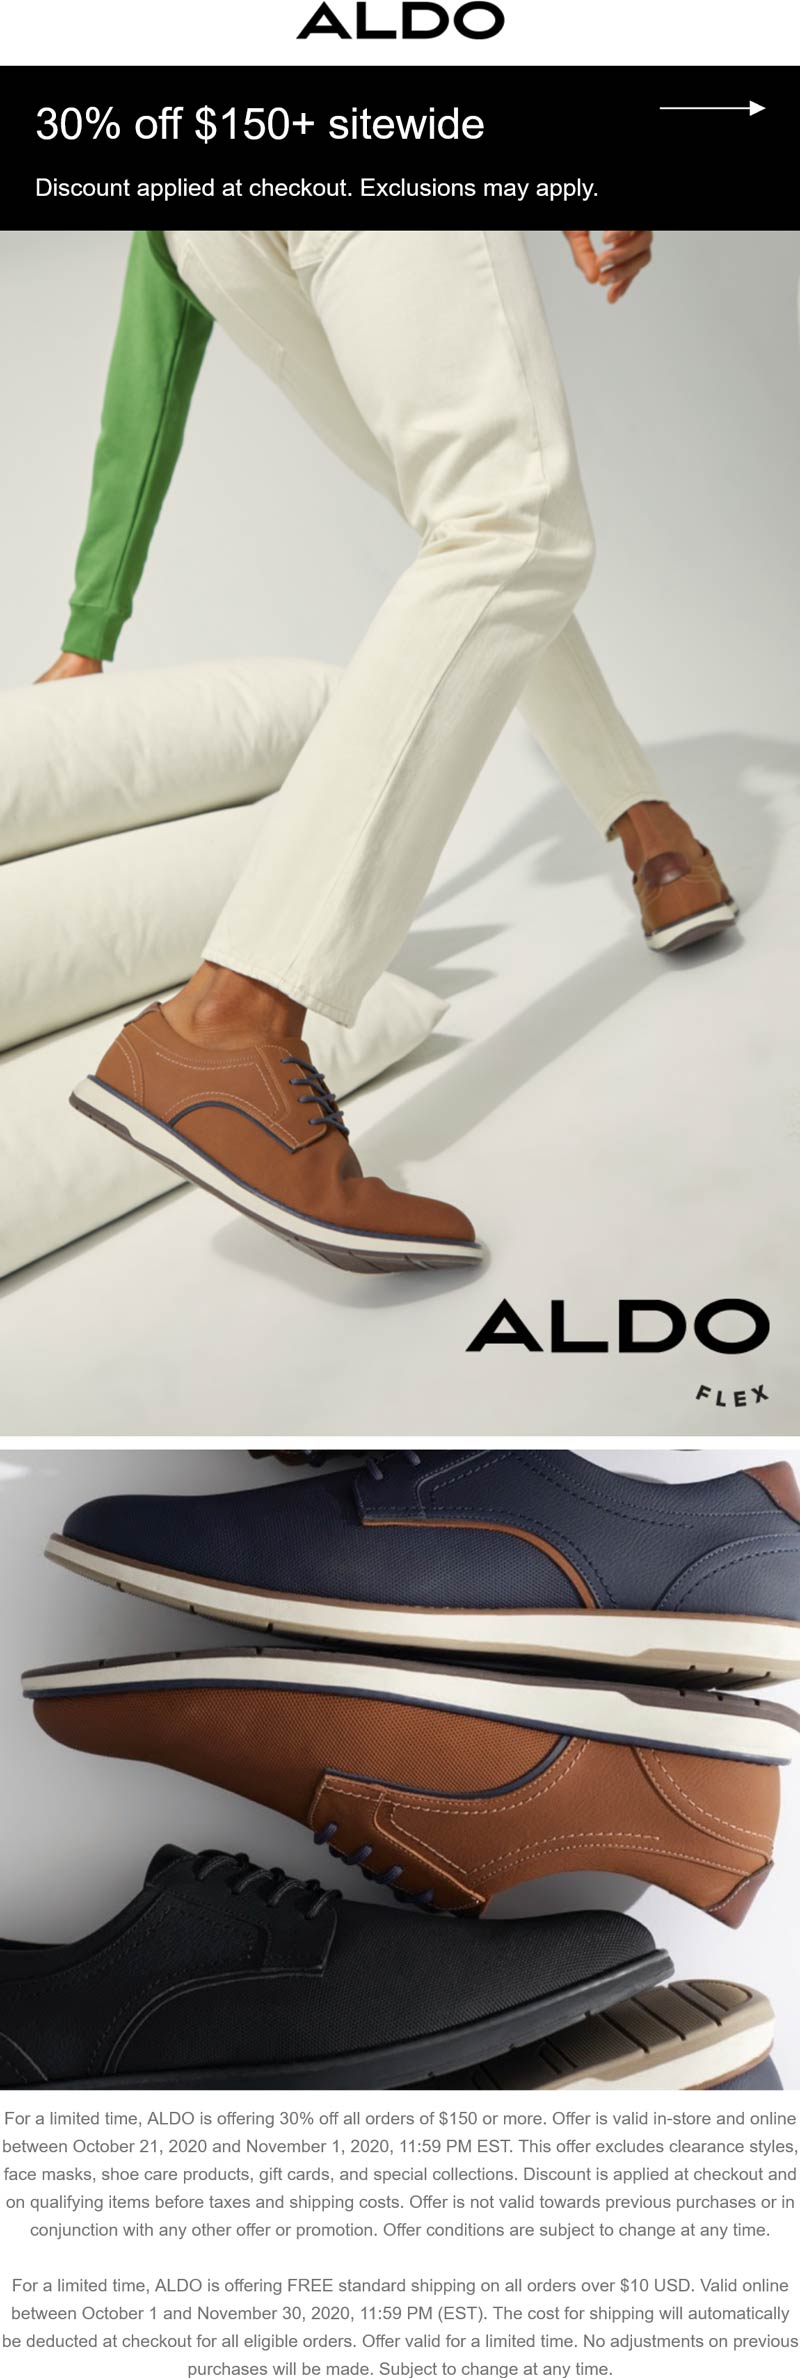 ALDO stores Coupon  30% off $150 on everything at ALDO shoes, ditto online #aldo 